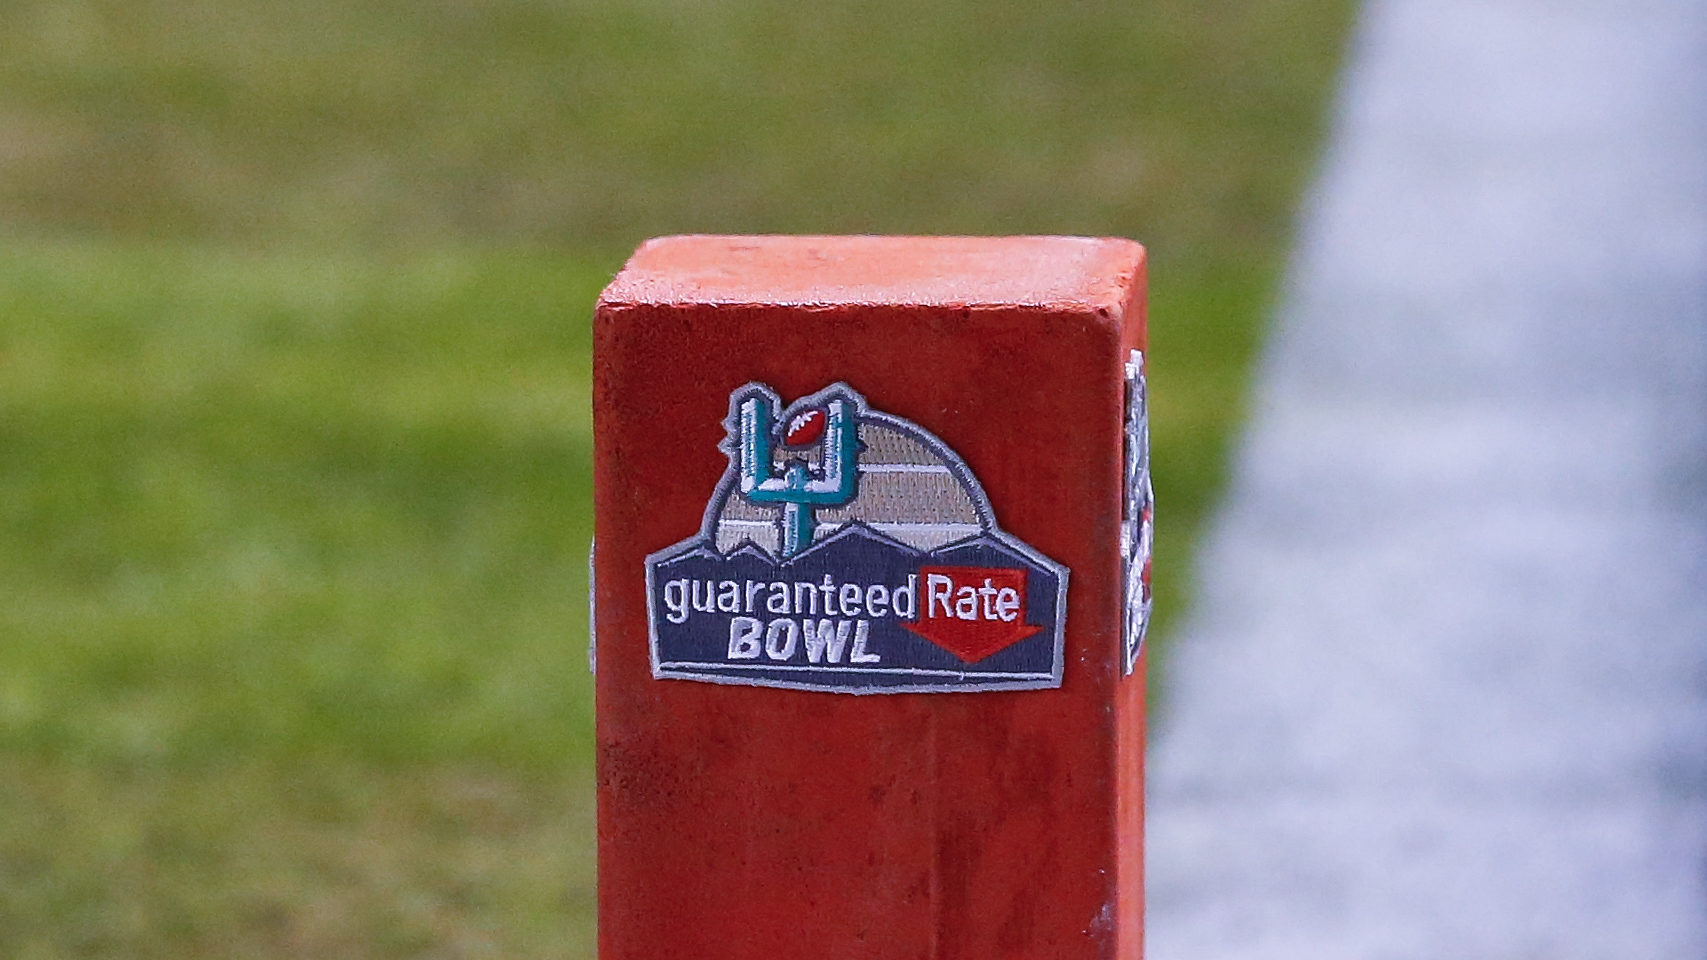 The Guaranteed Rate Bowl logo on an end zone marker before the Guaranteed Rate Bowl college footbal...